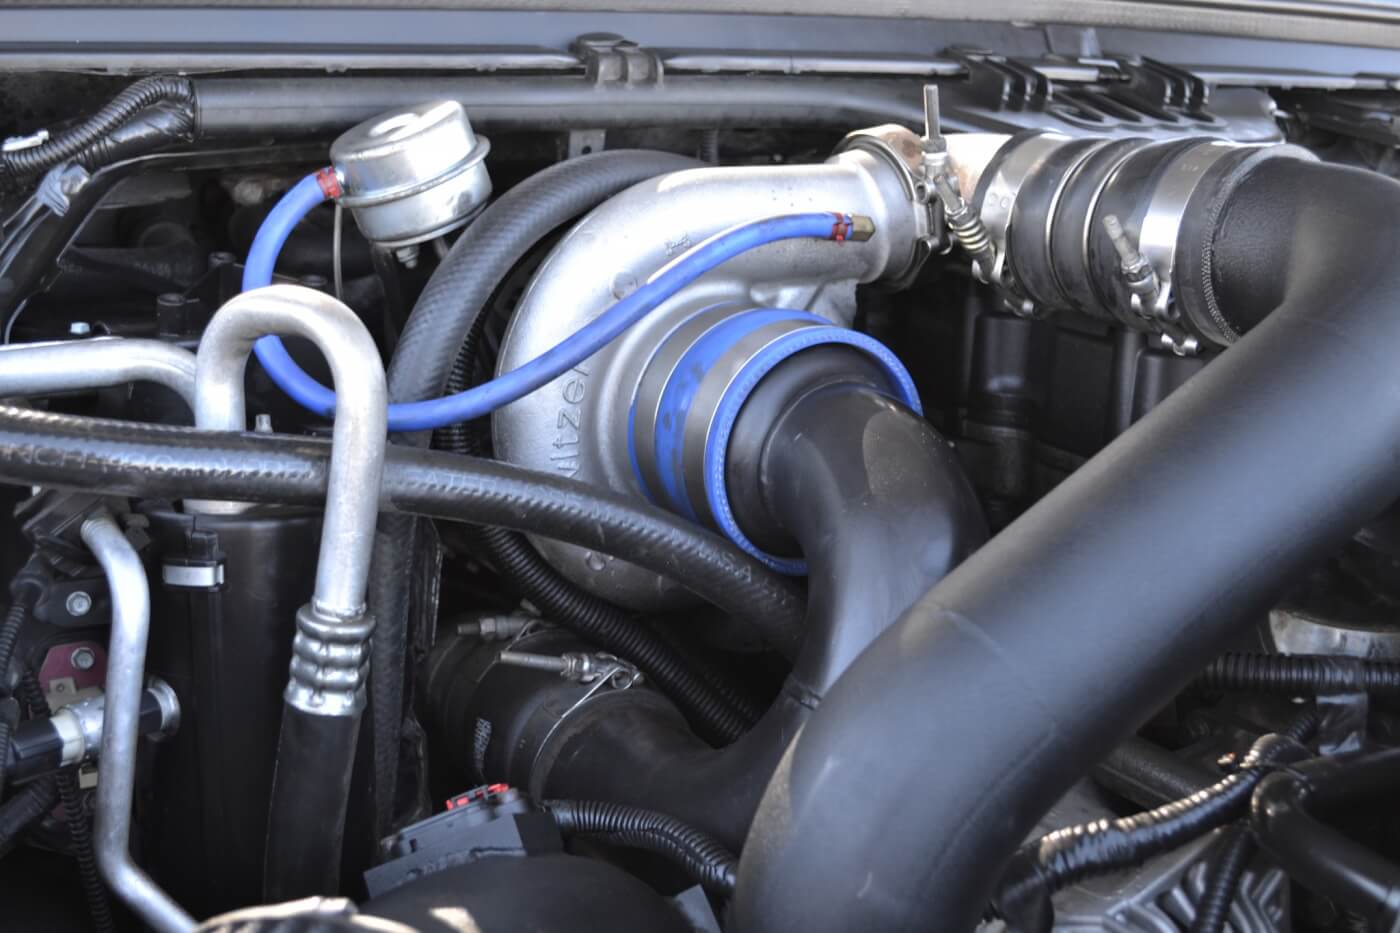 After the air is initially compressed by the big turbo, it is then fed through a 64mm turbocharger built by Engineered Diesel, which sends a whopping 70psi of boost through a Banks Power Stroke intercooler and into the engine.